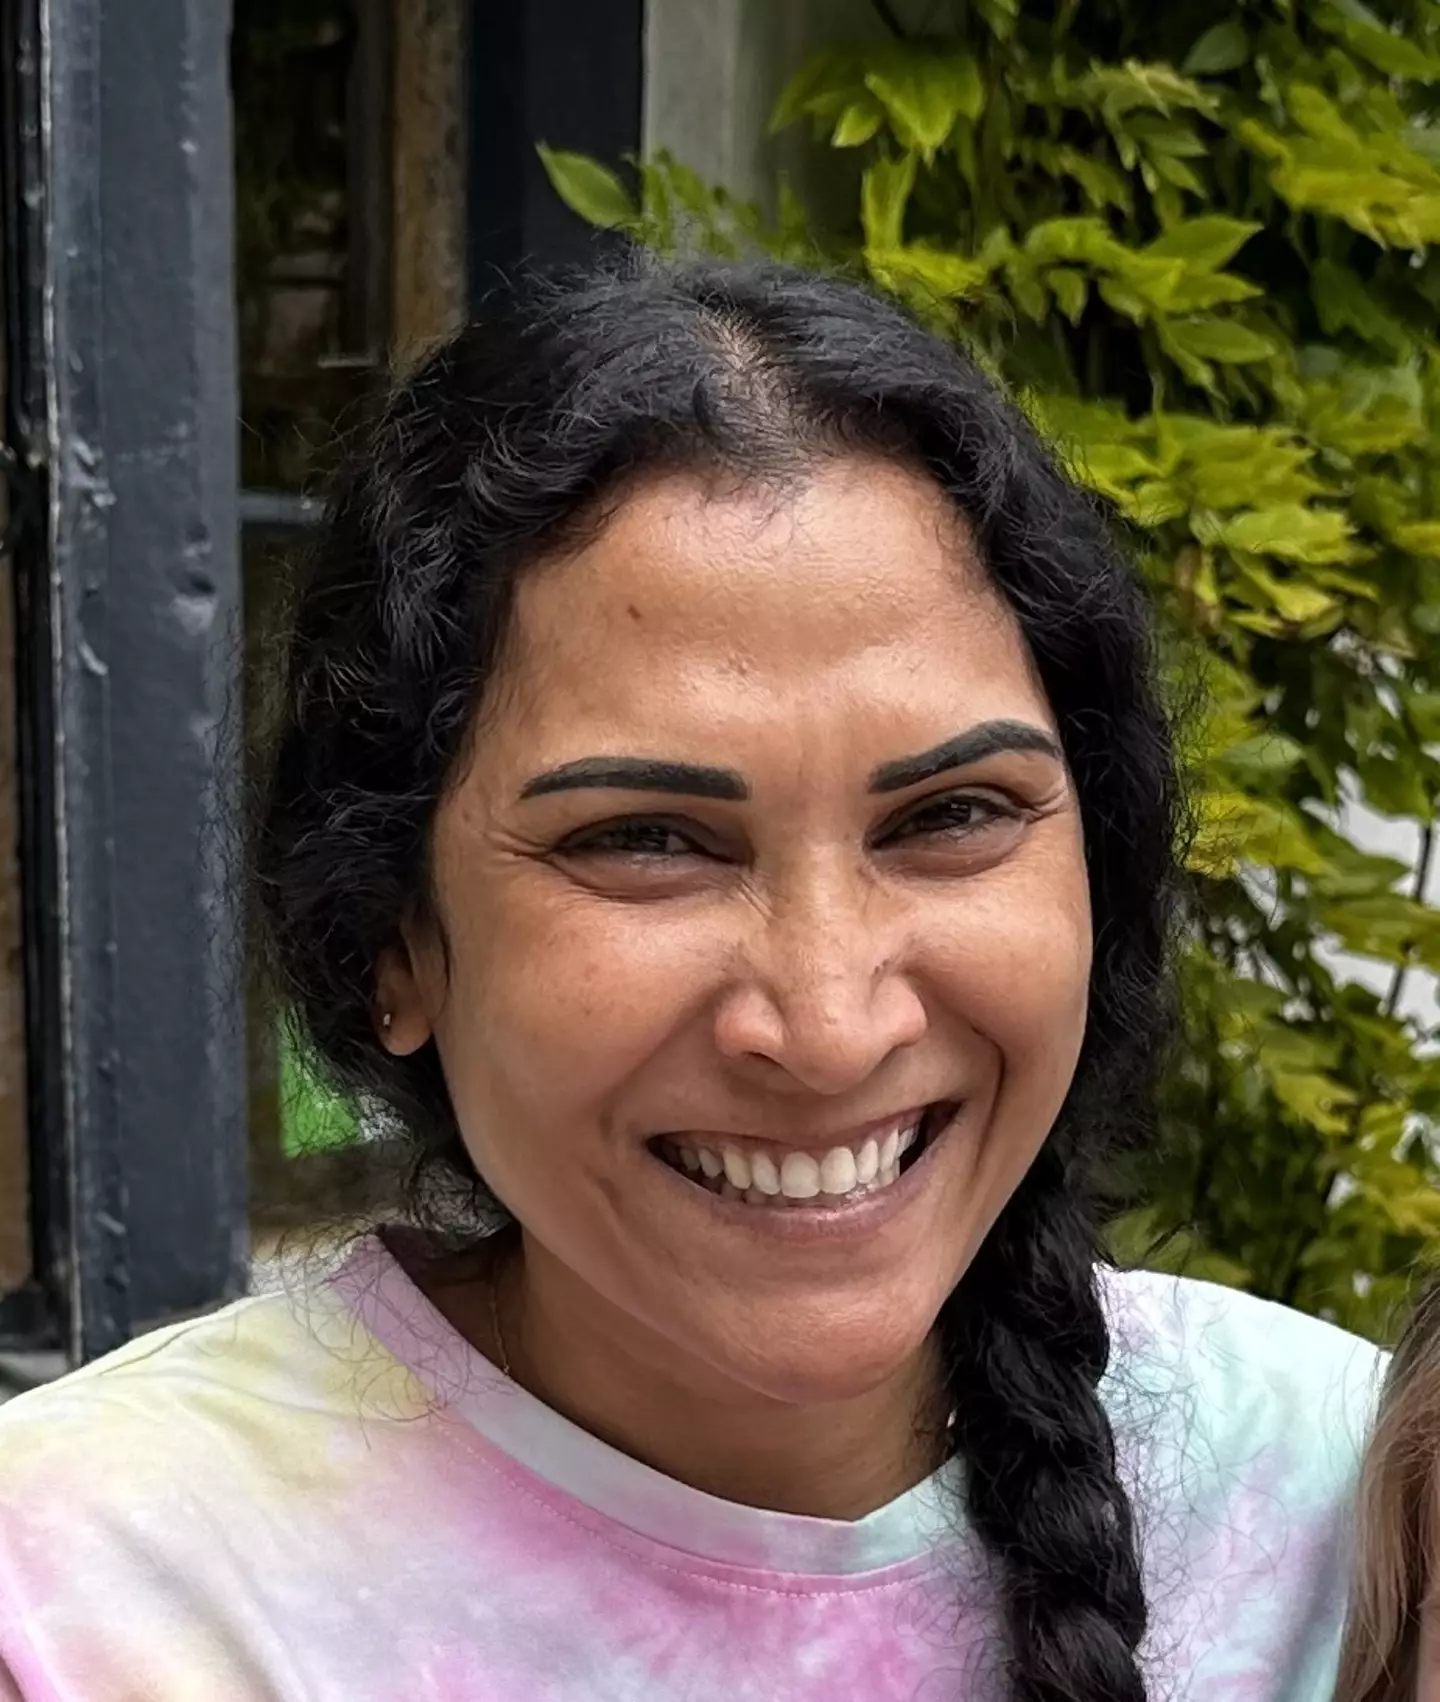 Inesha was last seen in Stow-on-the-Wold on Wednesday 16 August.